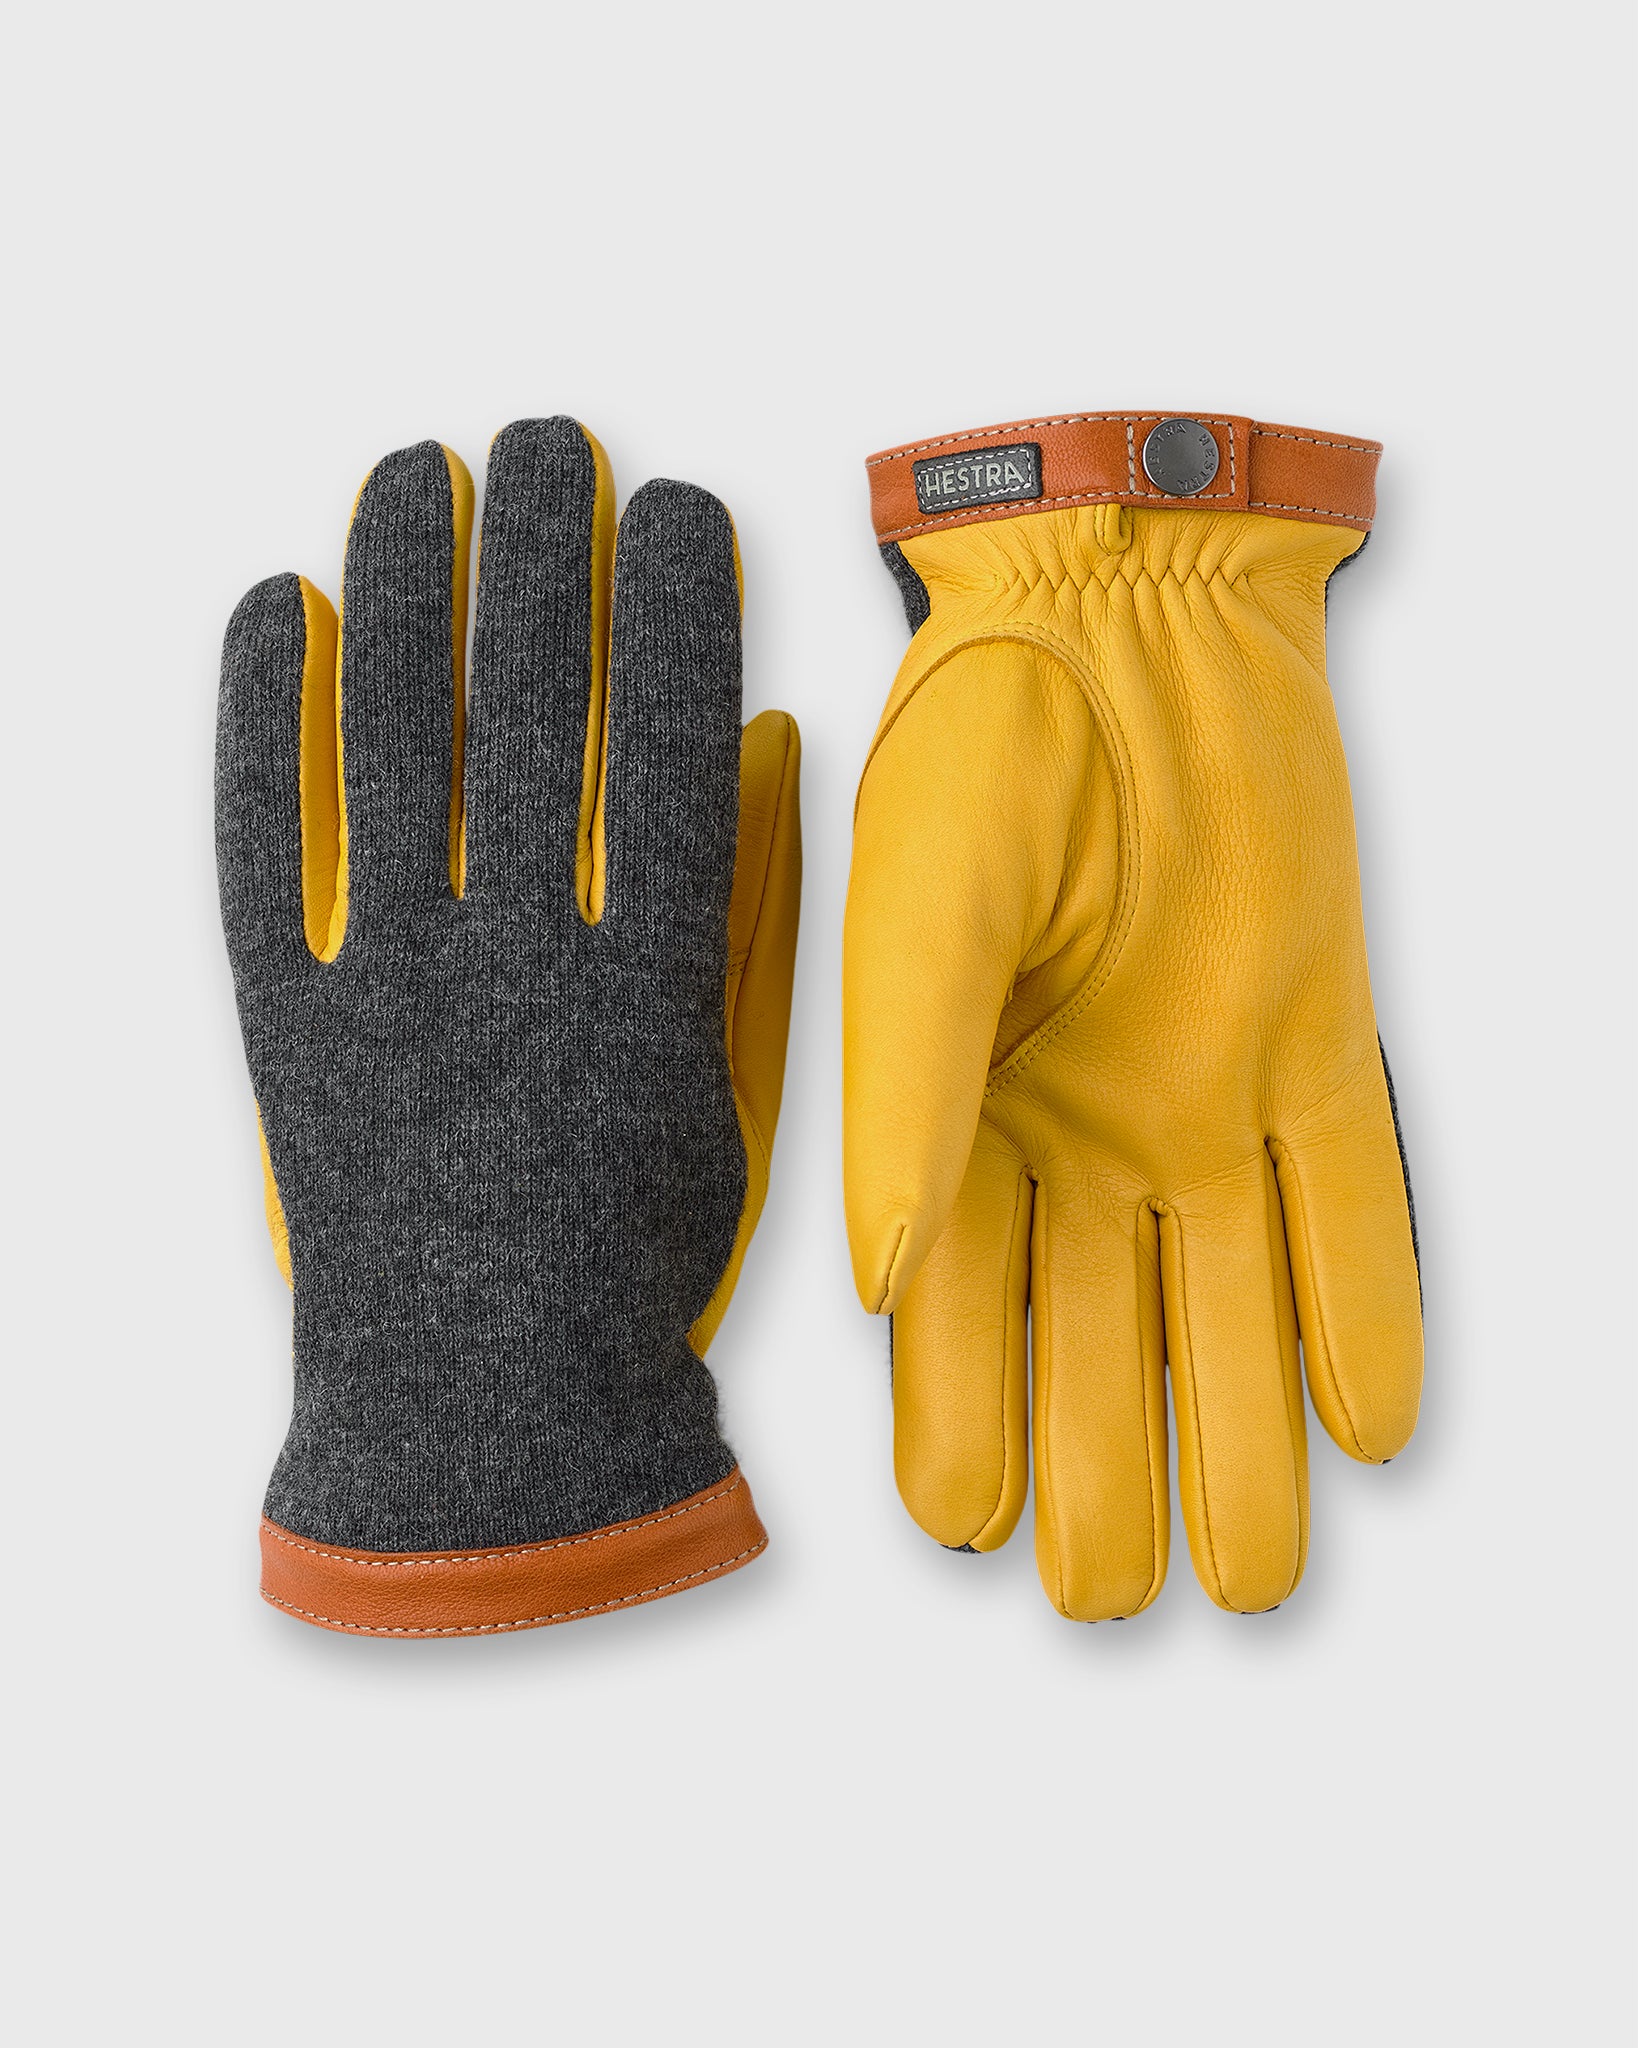 Deerskin Wool Tricot Gloves in Charcoal/Natural Yellow